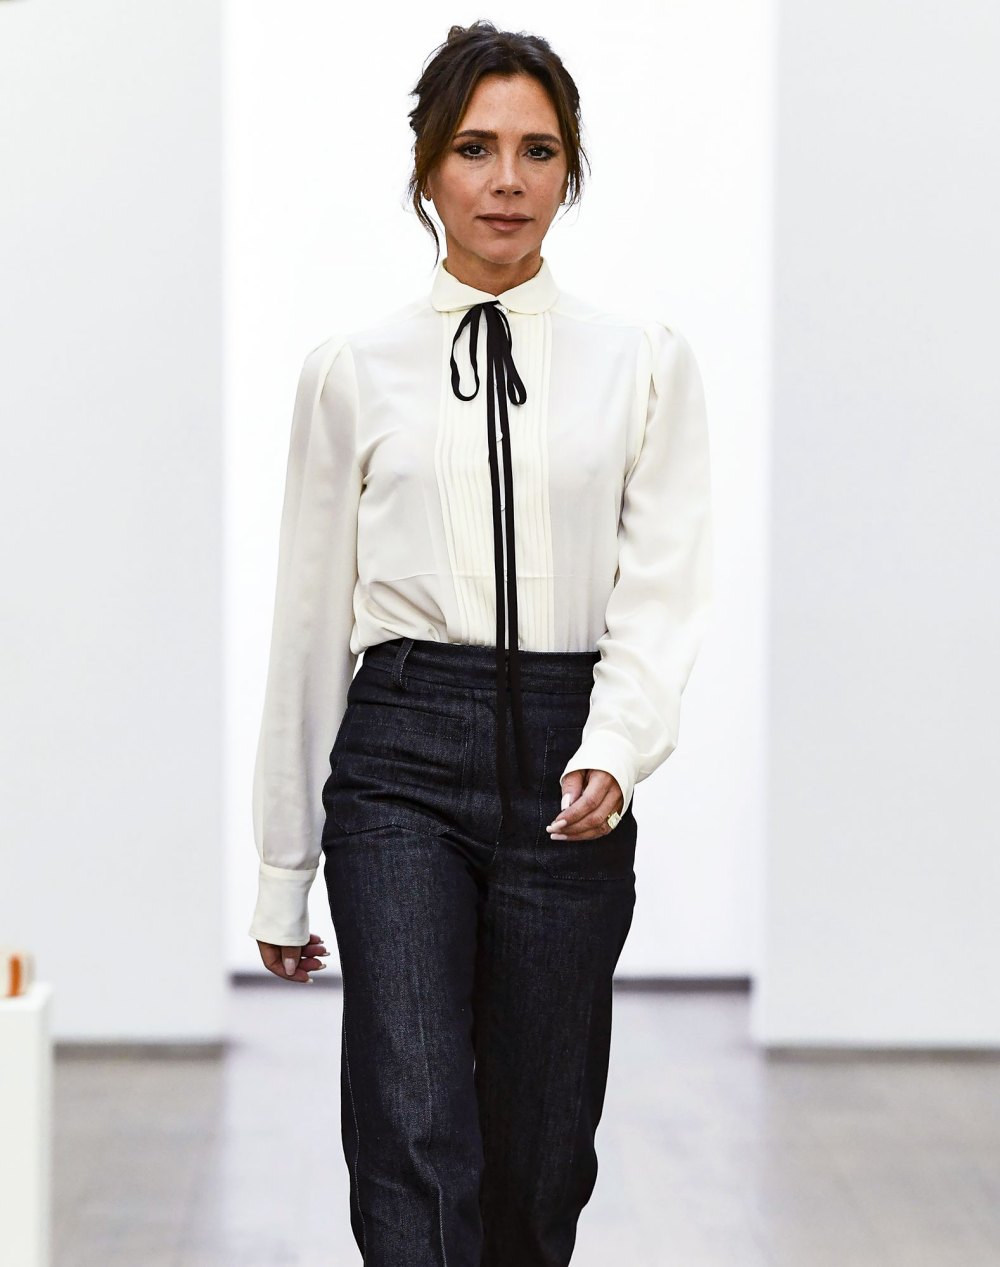 Victoria Beckham: I Probably Can’t Afford a Fashion Week Show